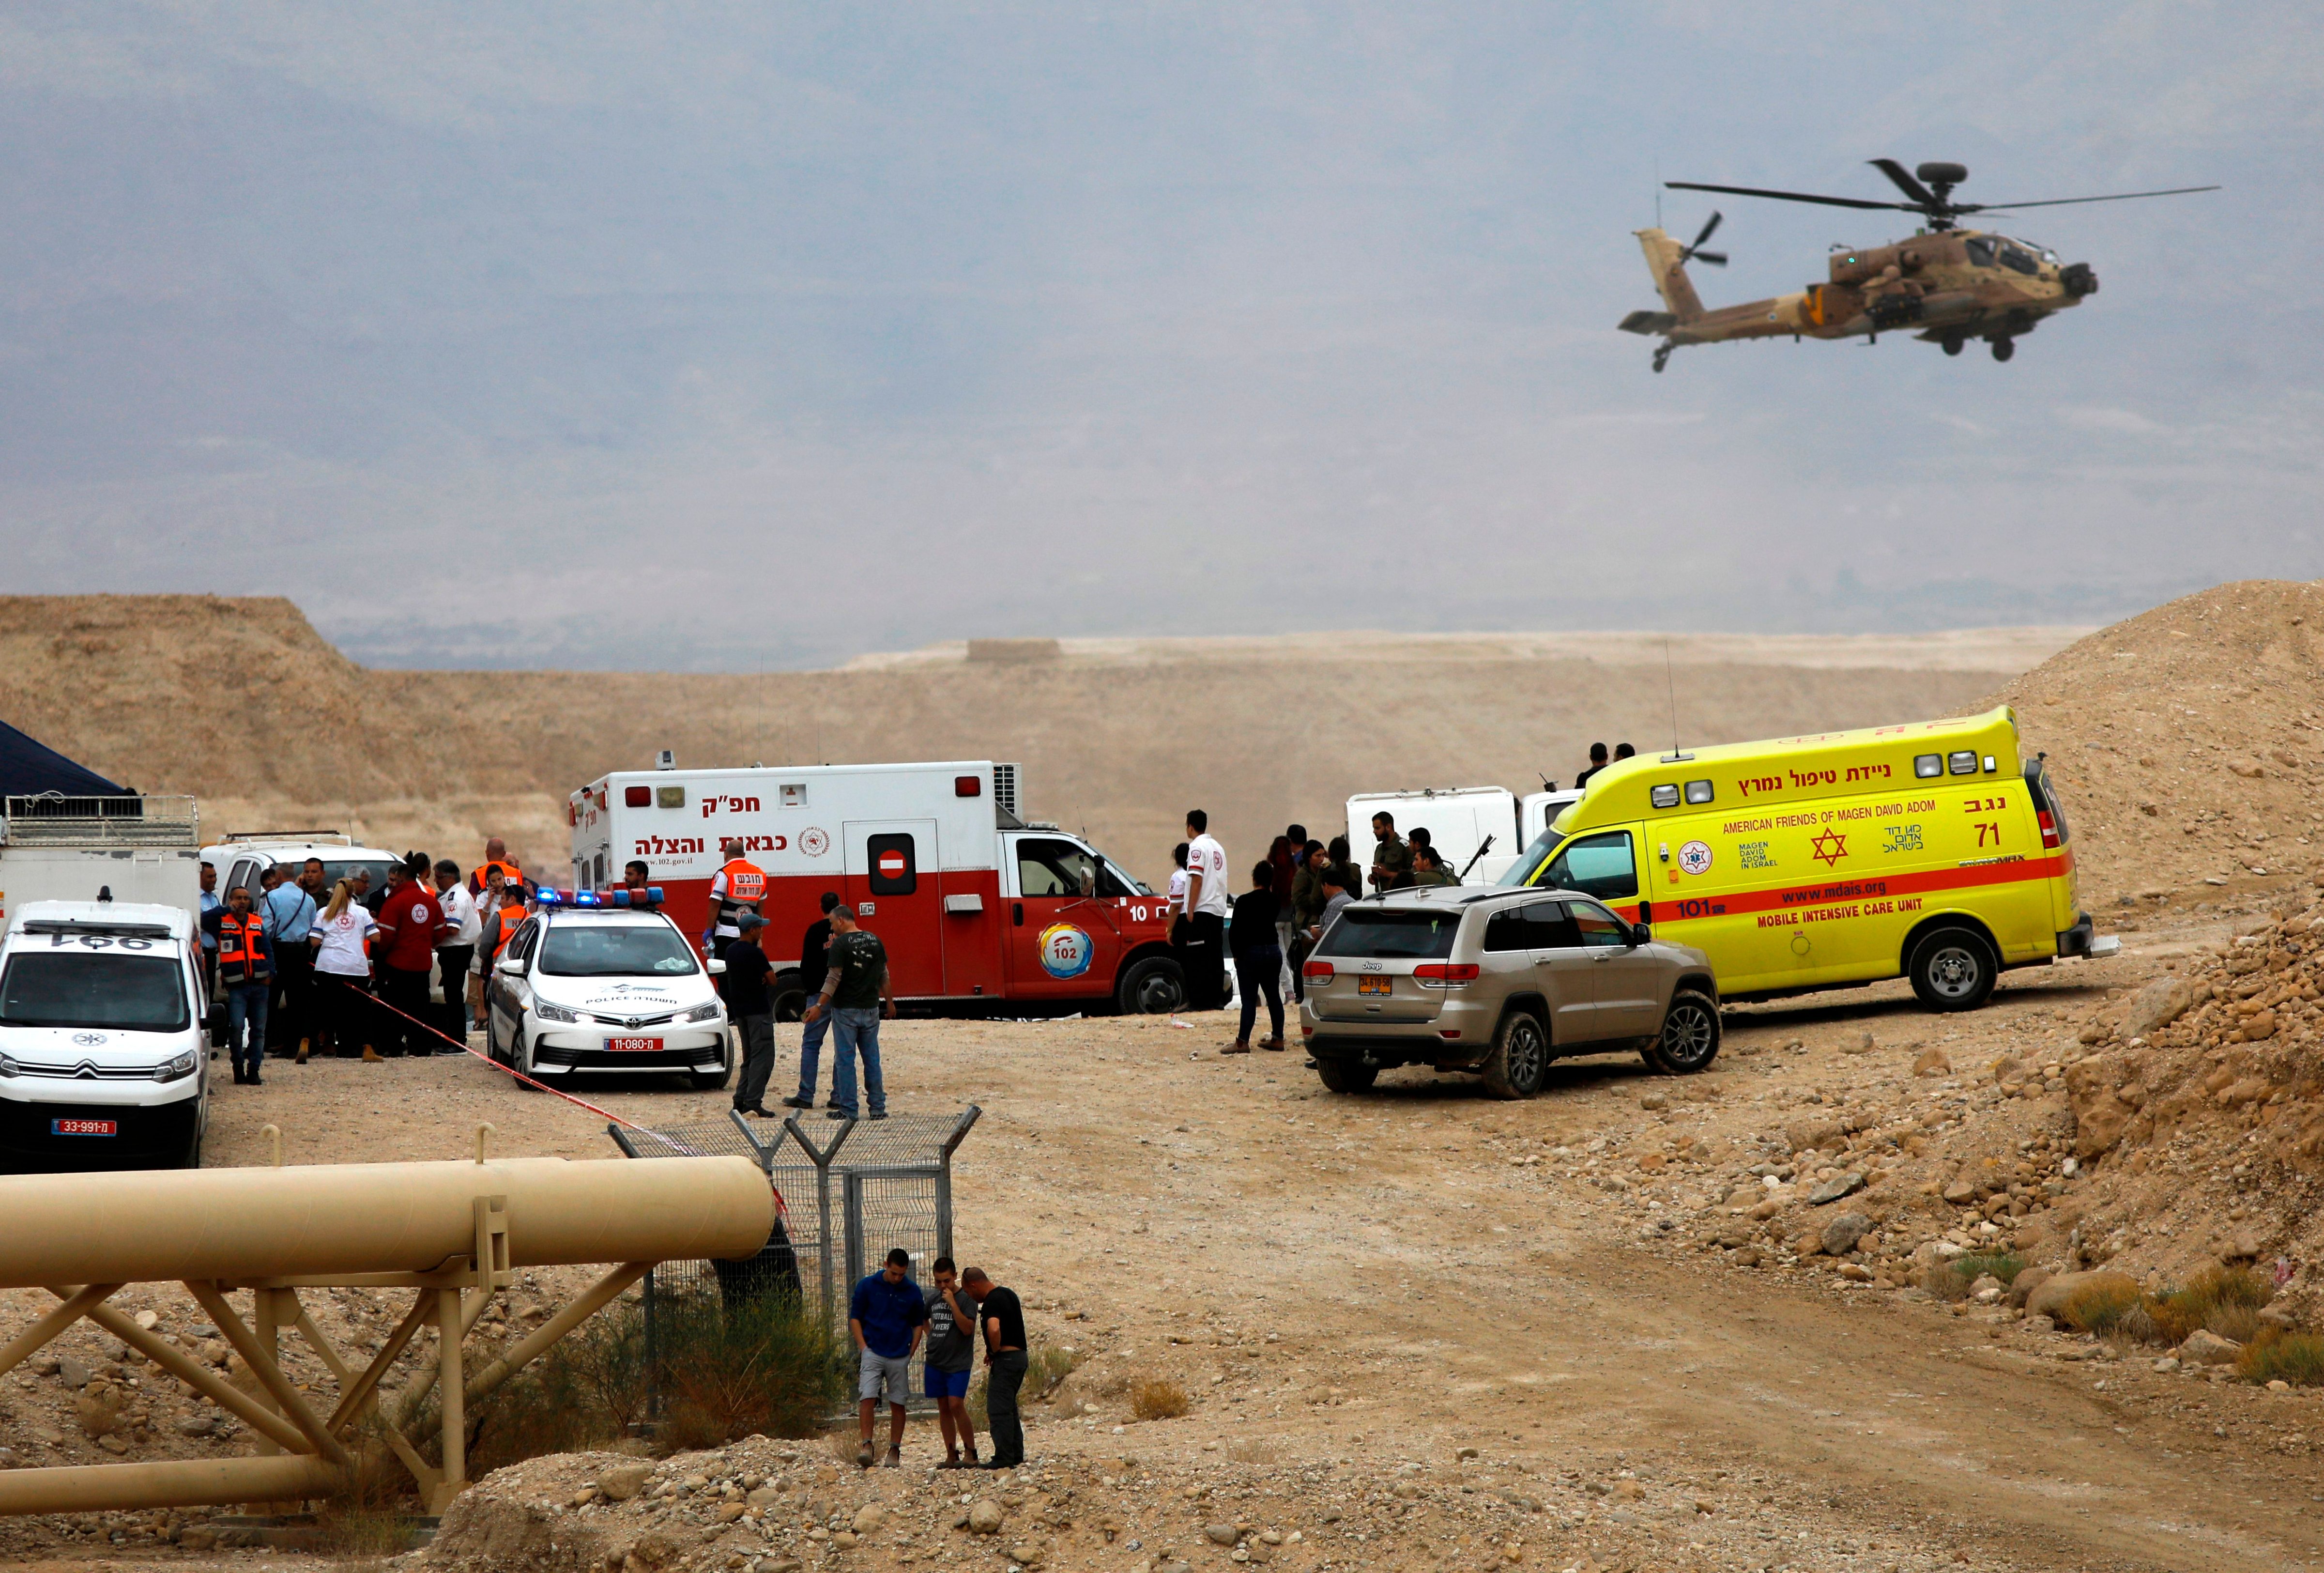 Israeli emergency services take part in a search mission for several young people missing near Arava in southern Israel after flash floods swept through the area while they were hiking near the Dead Sea on April 26, 2018. (MENAHEM KAHANA—AFP/Getty Images)